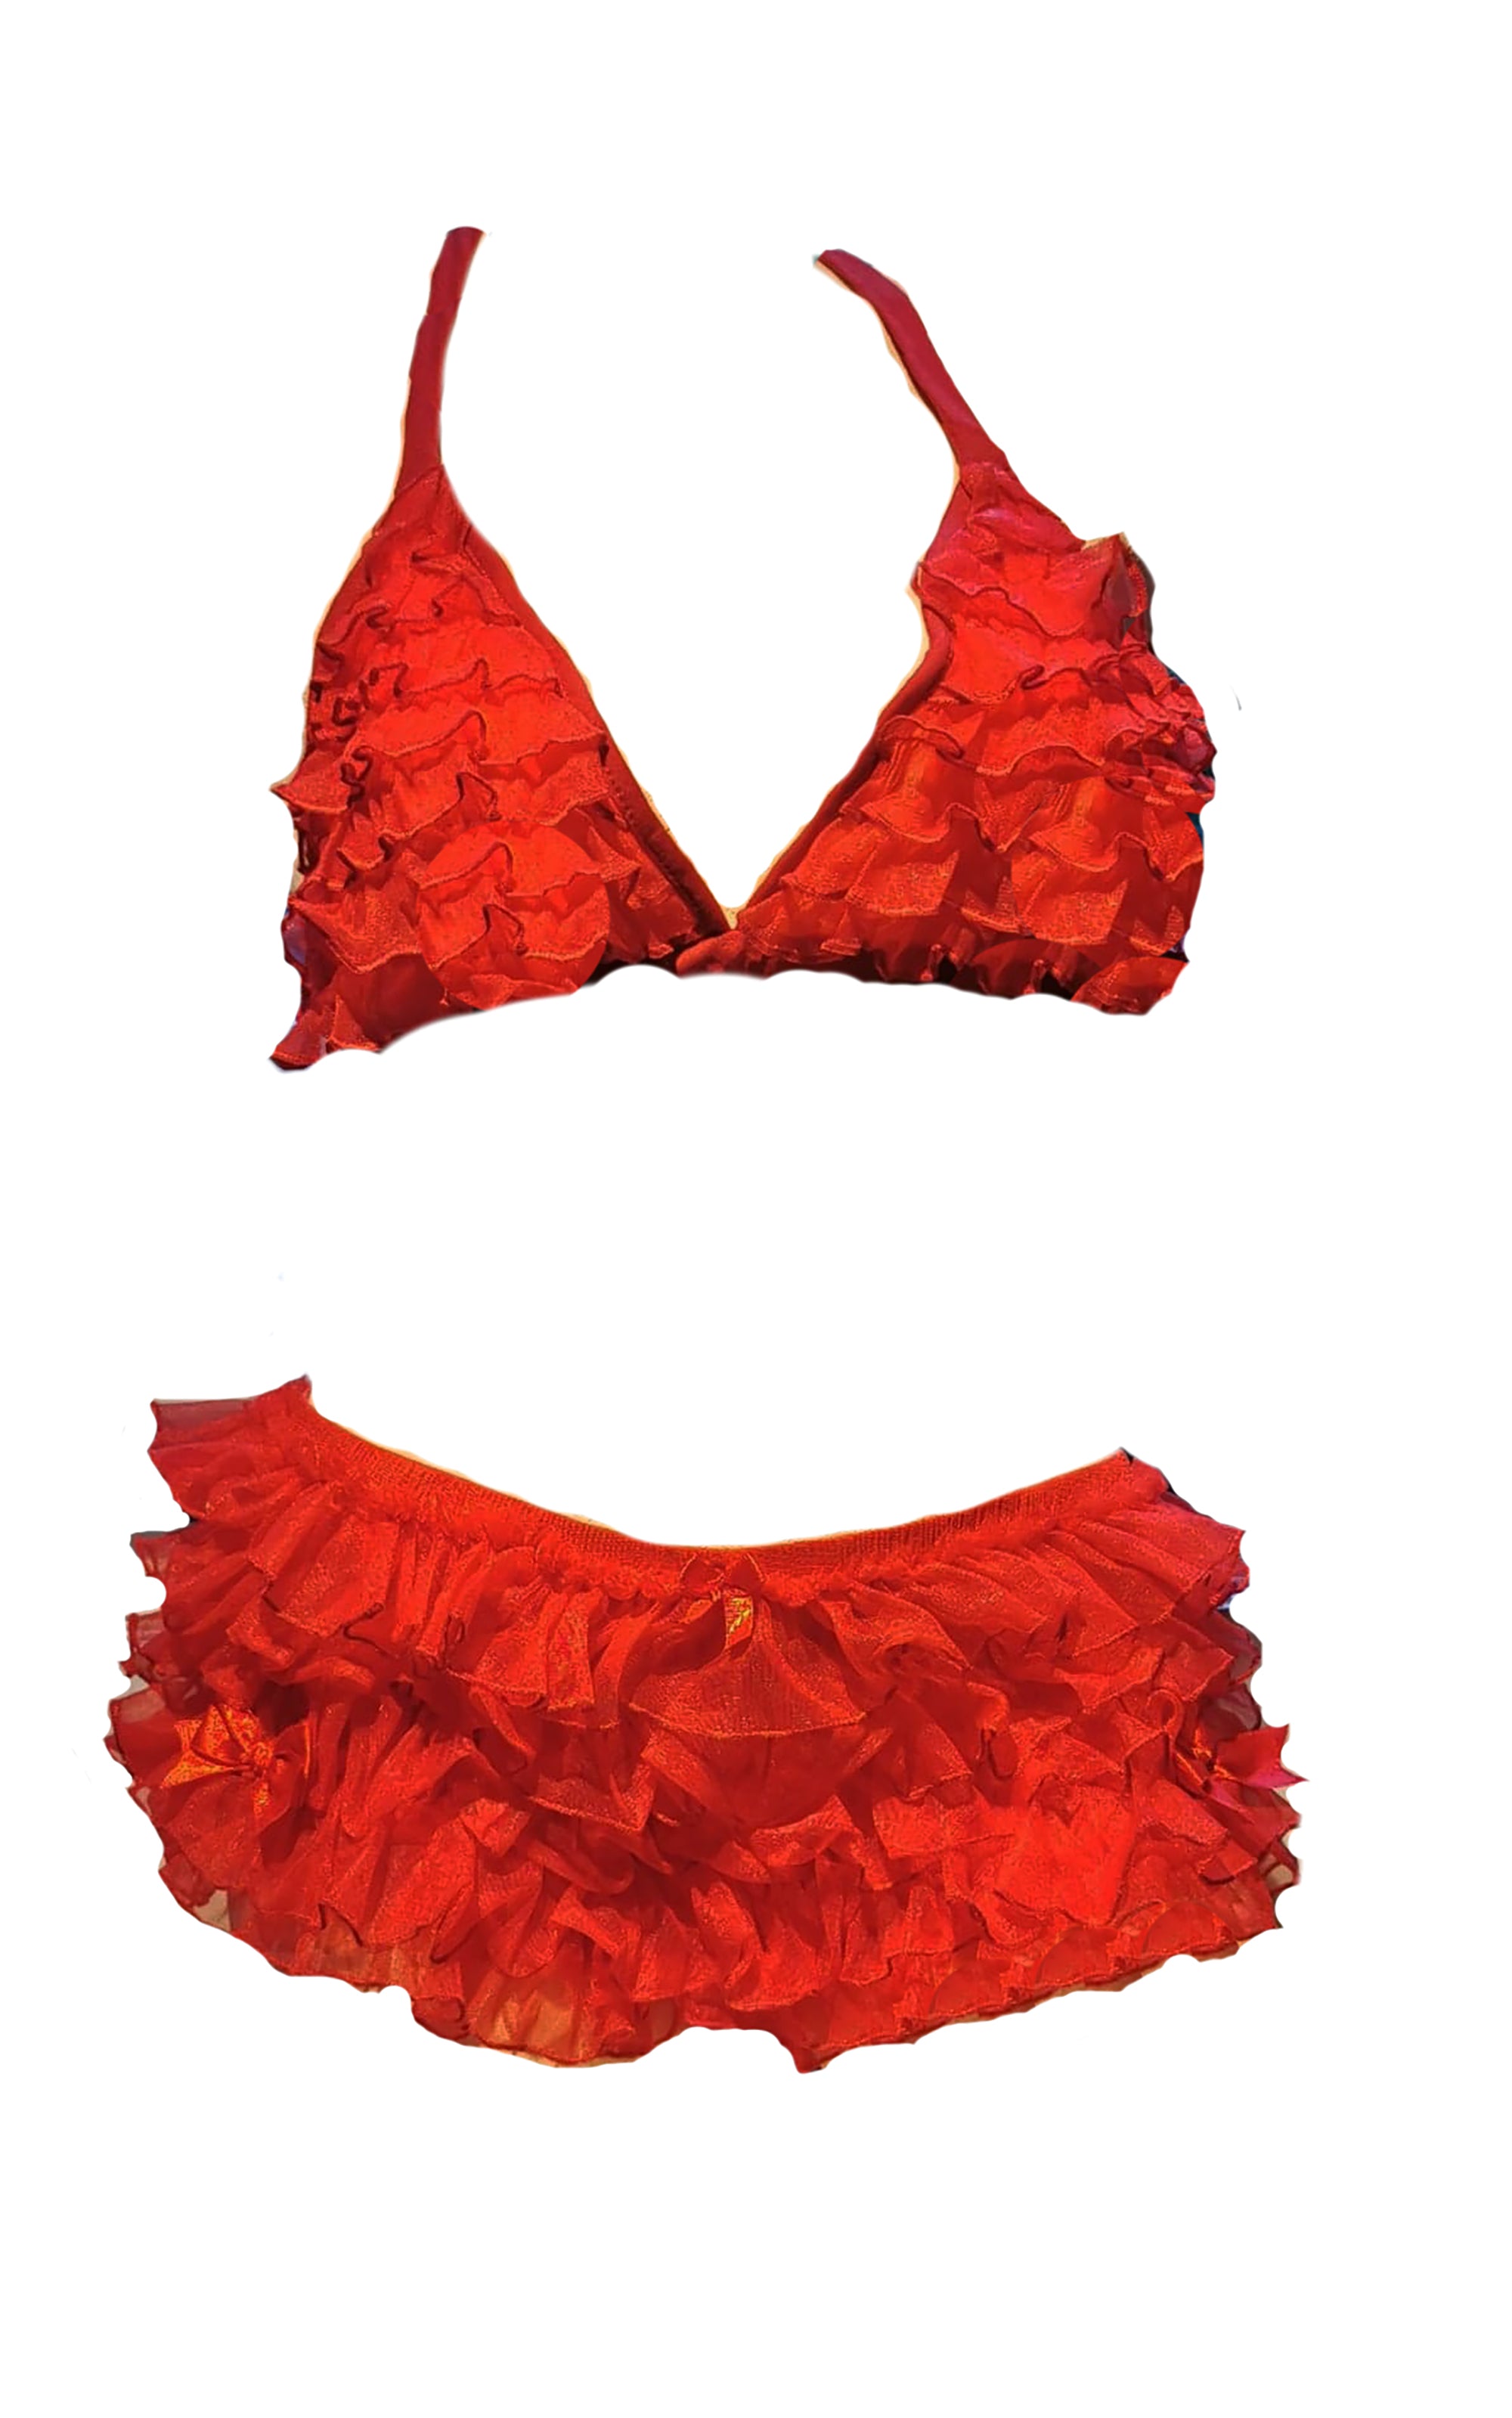 Classic Frilly Bra and Knicker Set, Burlesque Lingerie┃Starlinelingerie –  StarRivera